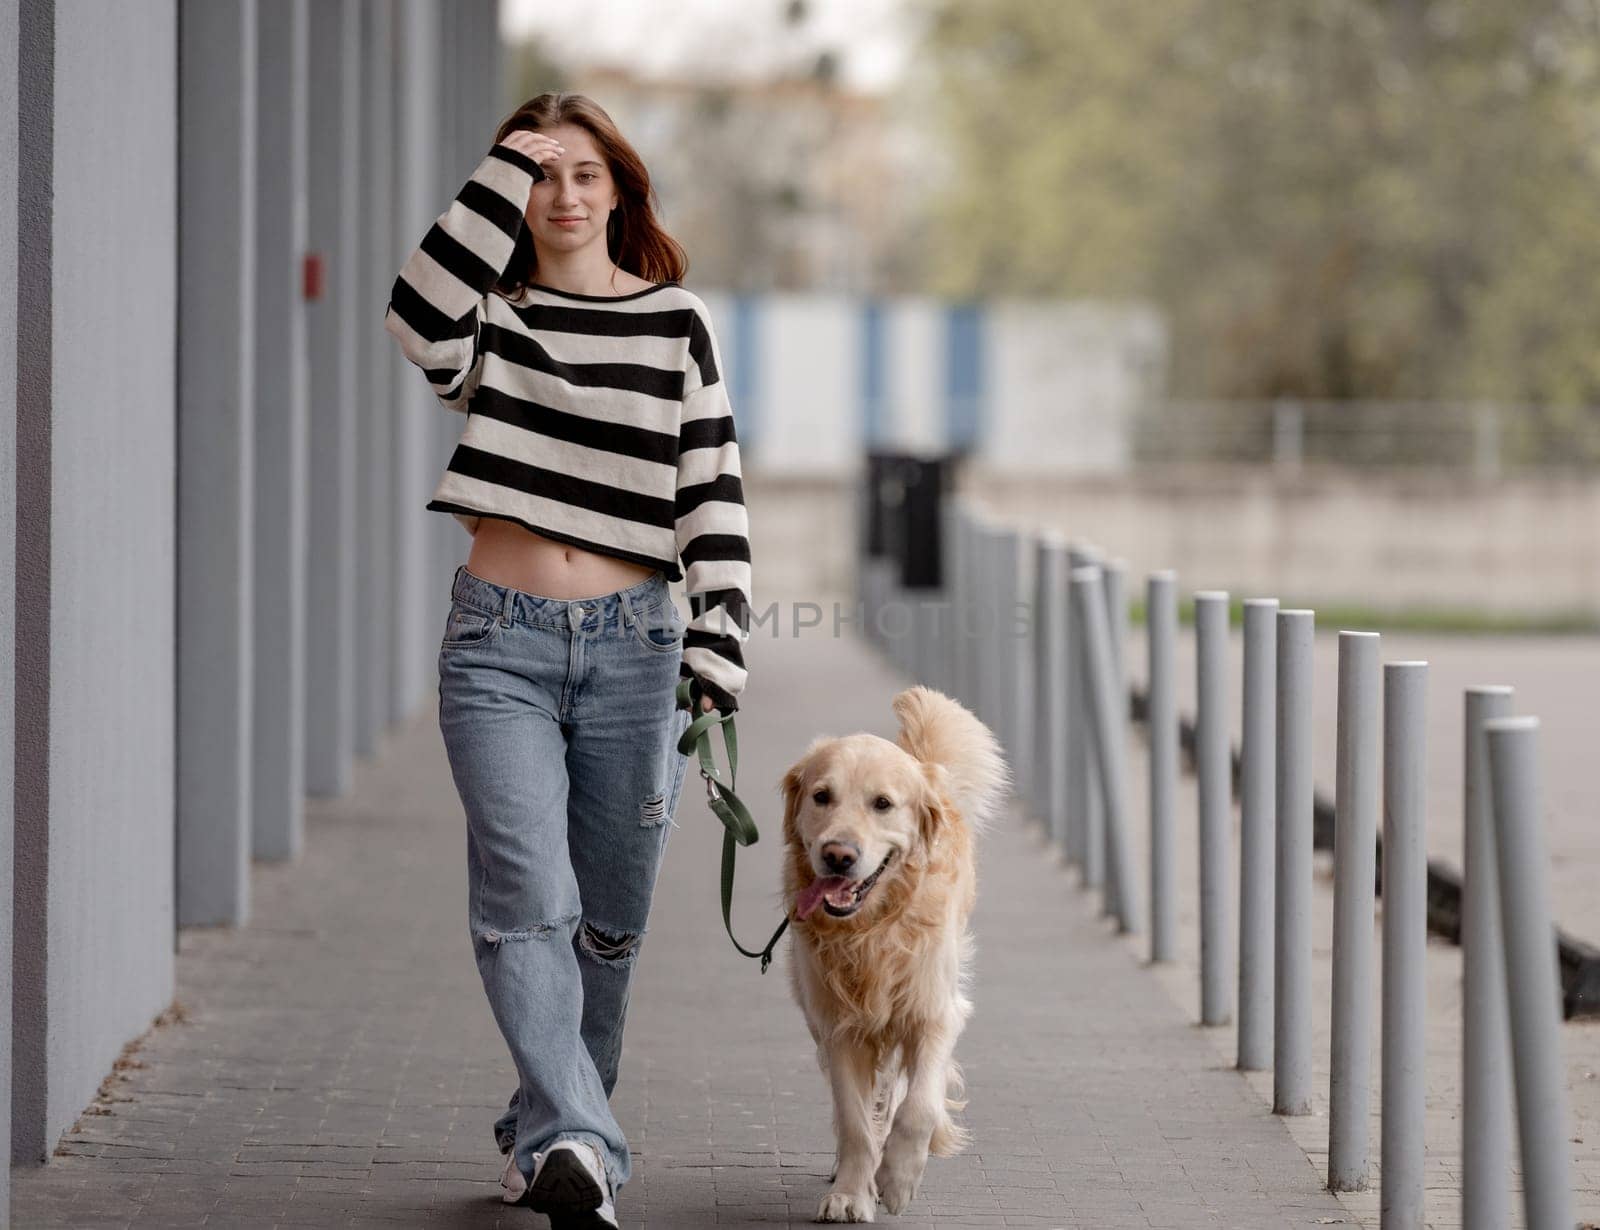 Teenage Girl Walks With Golden Retriever In City During Spring